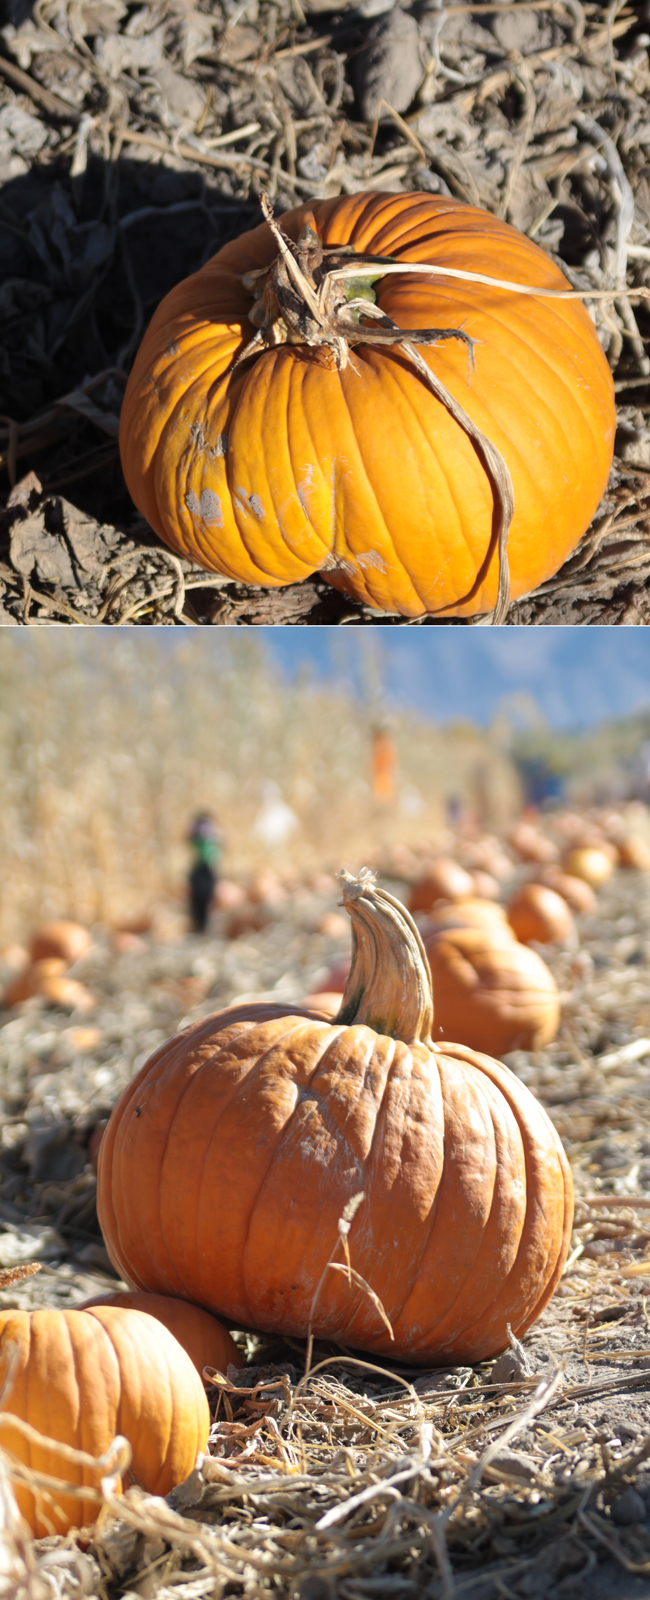 snapshot of pumpkin in patch; photo of pumpkin taken so you can see the row of pumpkins behind it as well